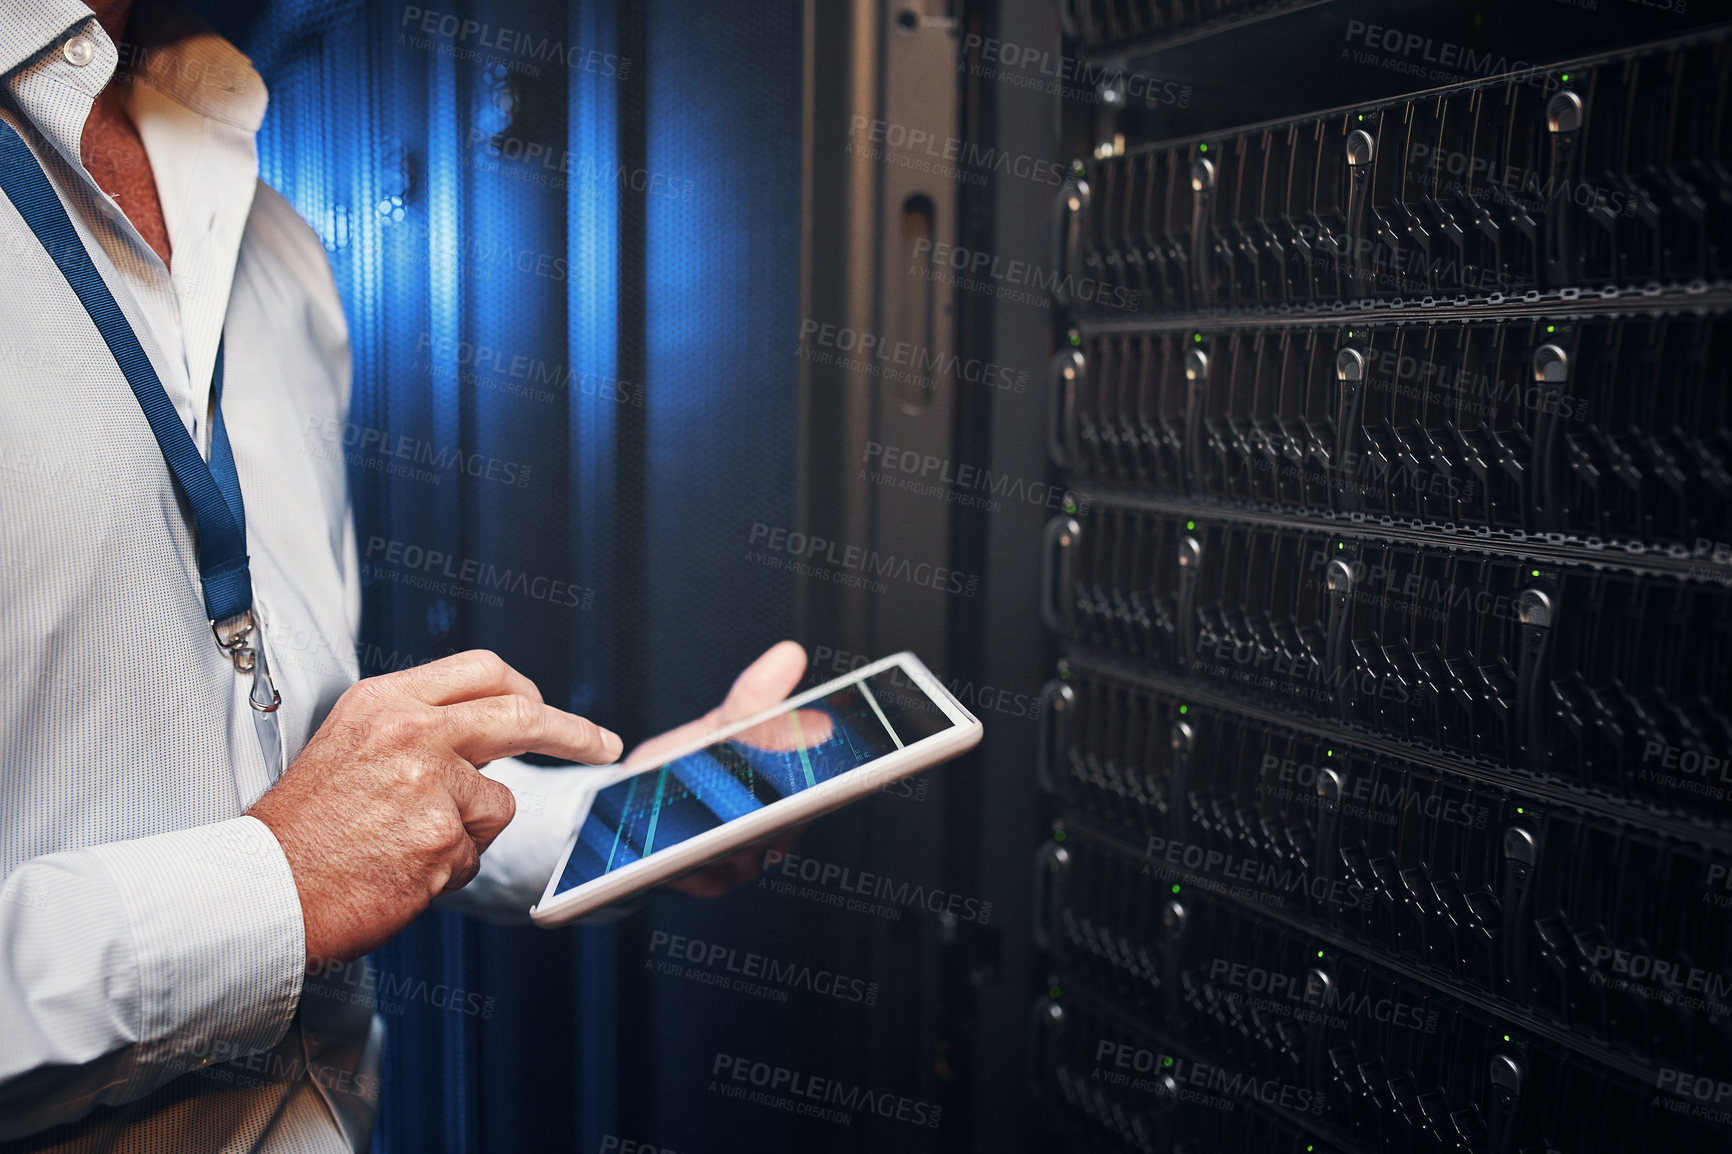 Buy stock photo Shot of an unrecognisable man using a digital tablet while working in a server room